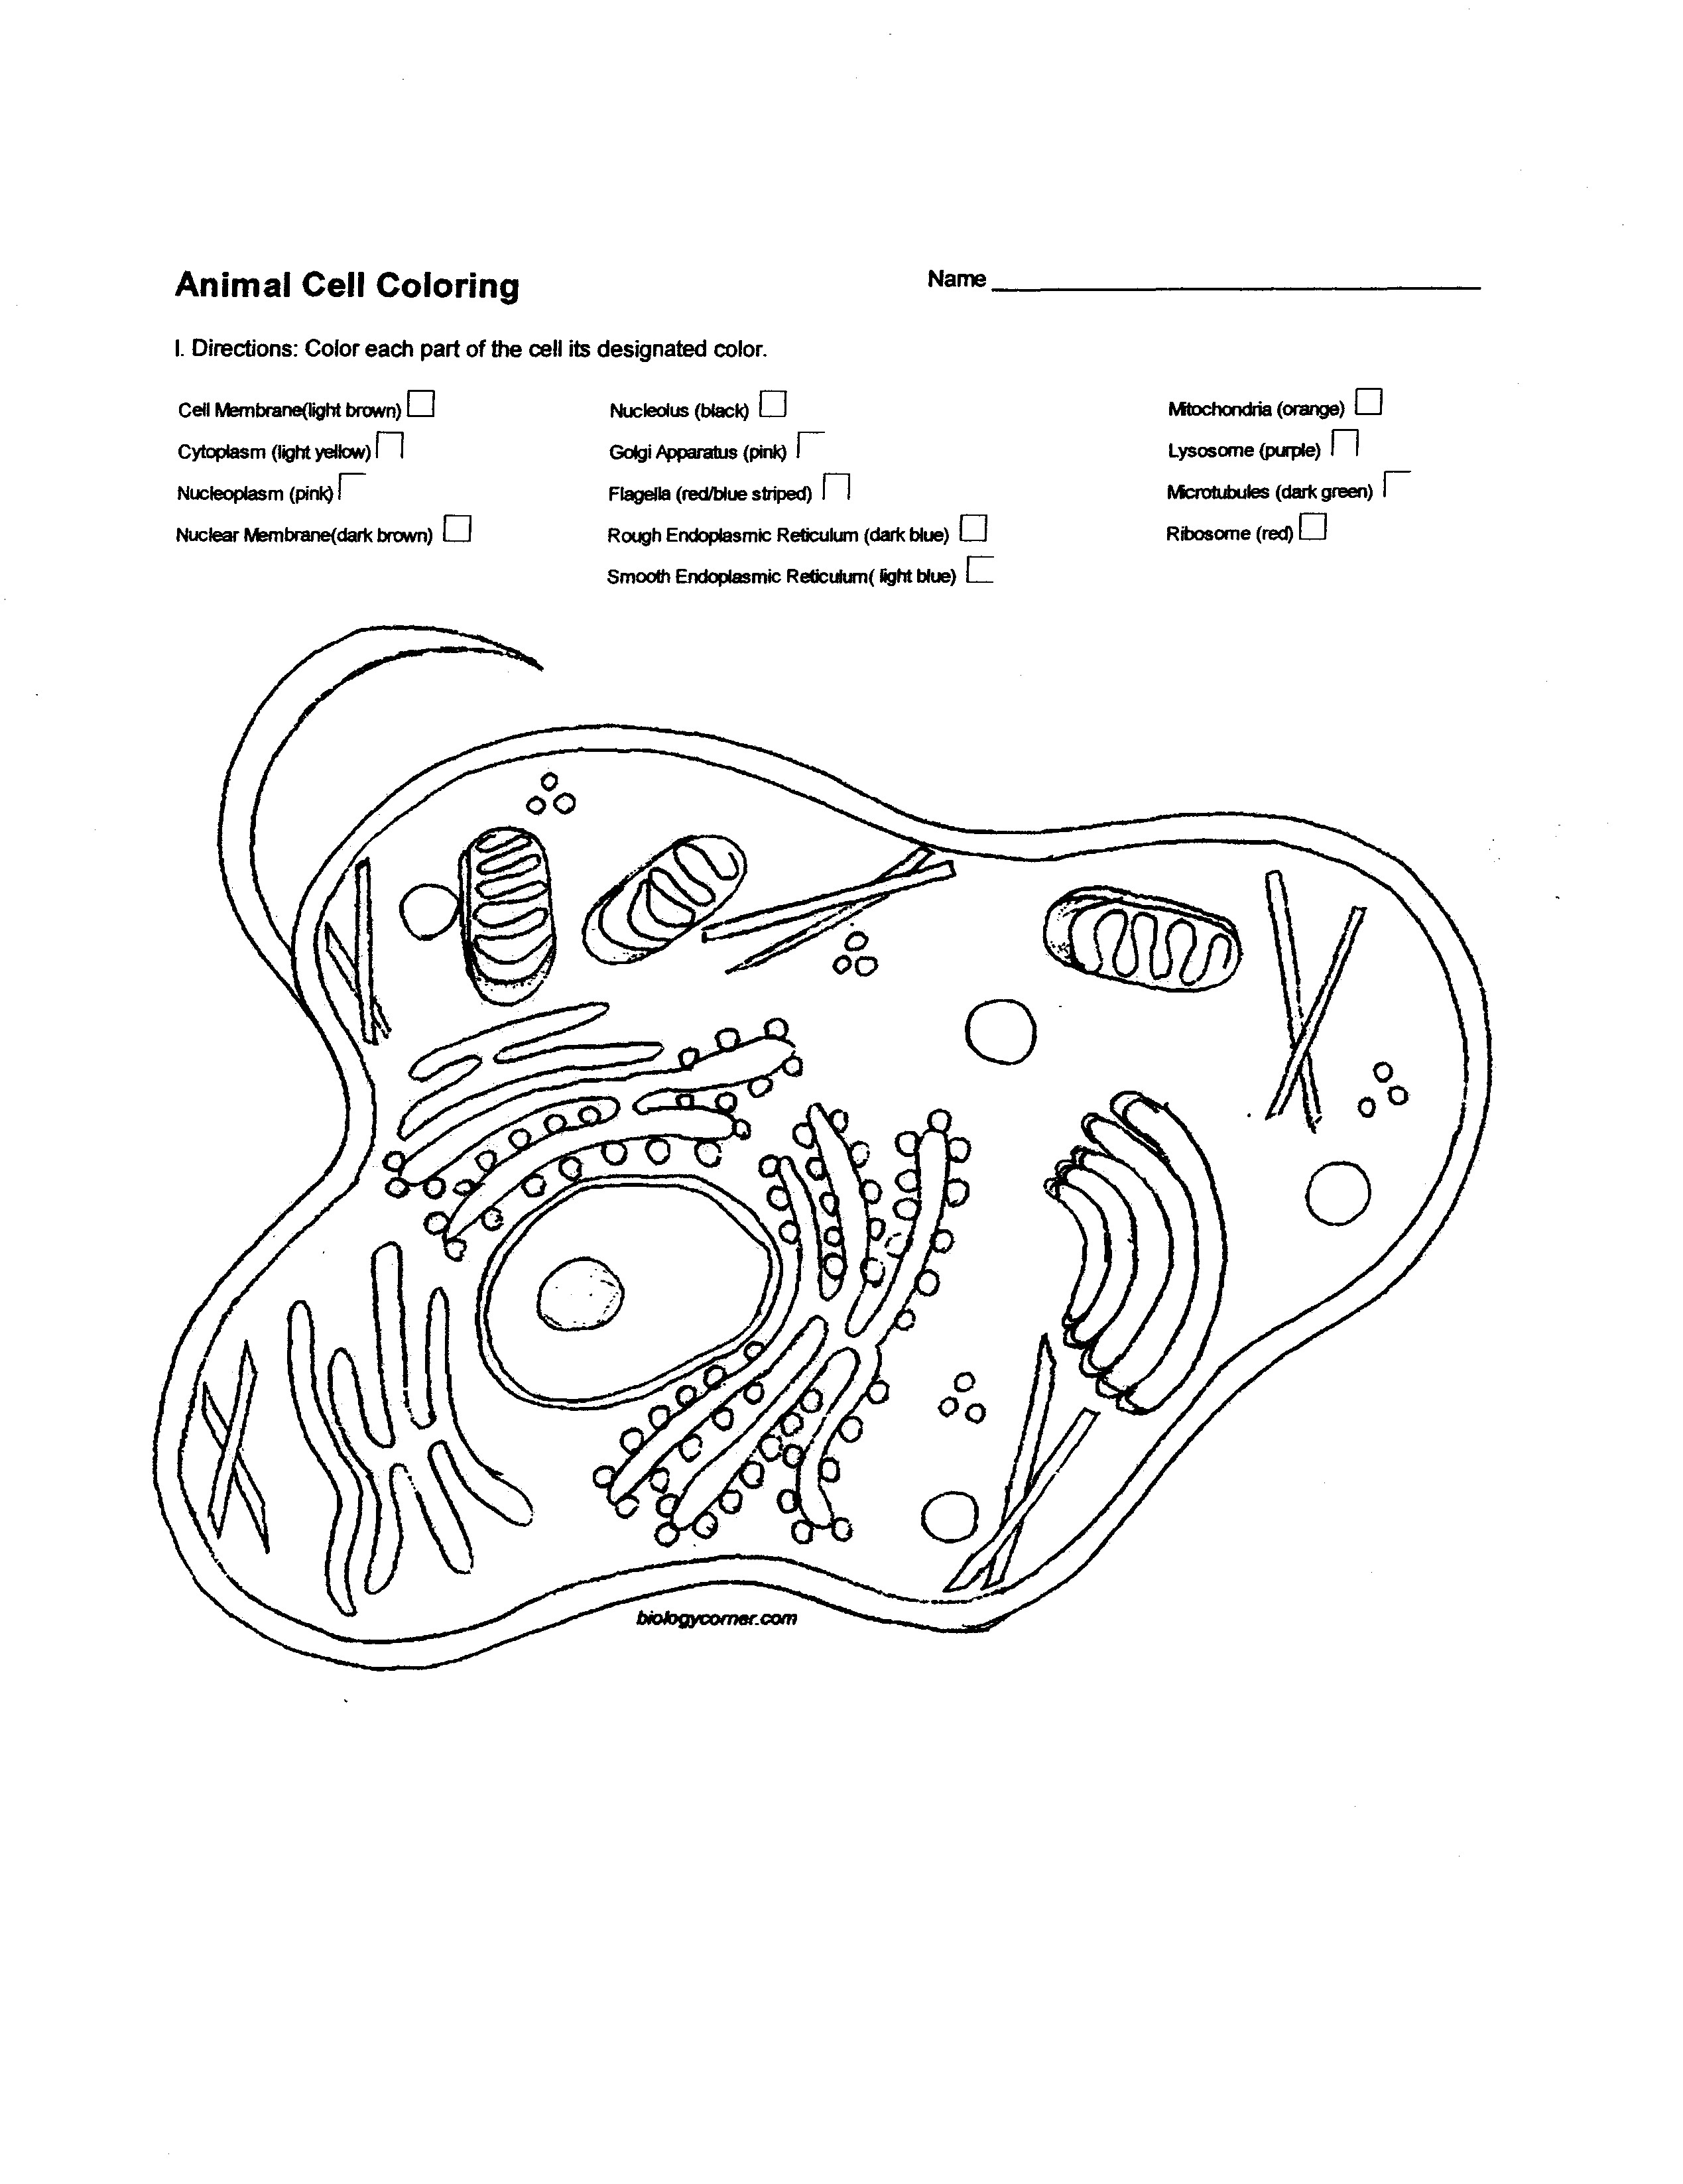 New animal cell coloring answer sheet Collection 12t 2538x3294 Diagram Plant Cell Diagram Animal Simple